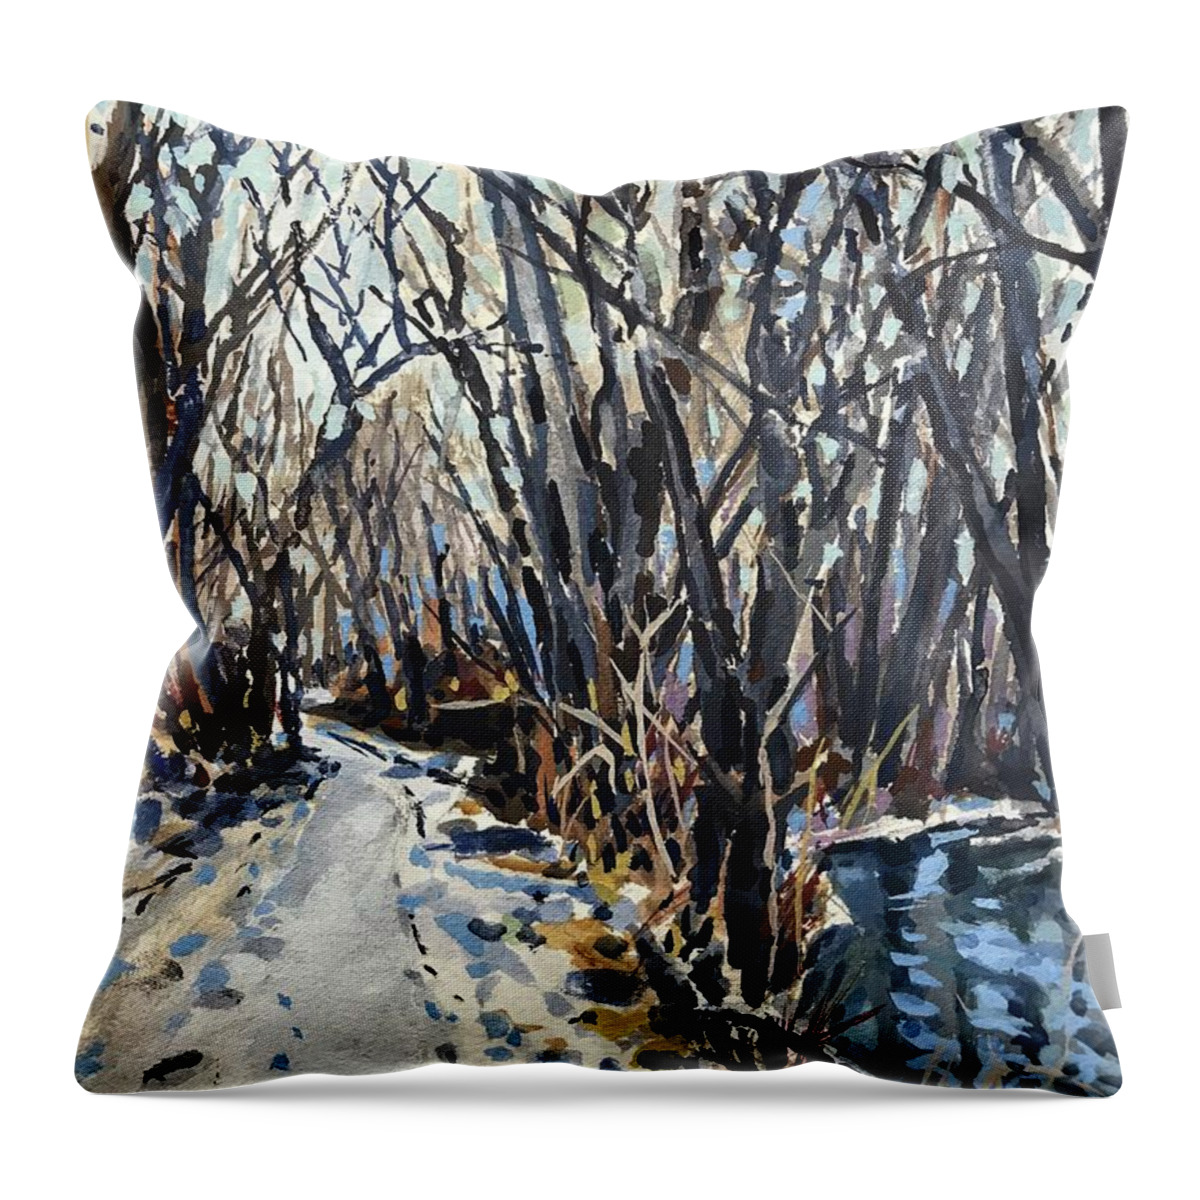 Snow Greenbelt Throw Pillow featuring the painting Greenbelt Snow study by Les Herman